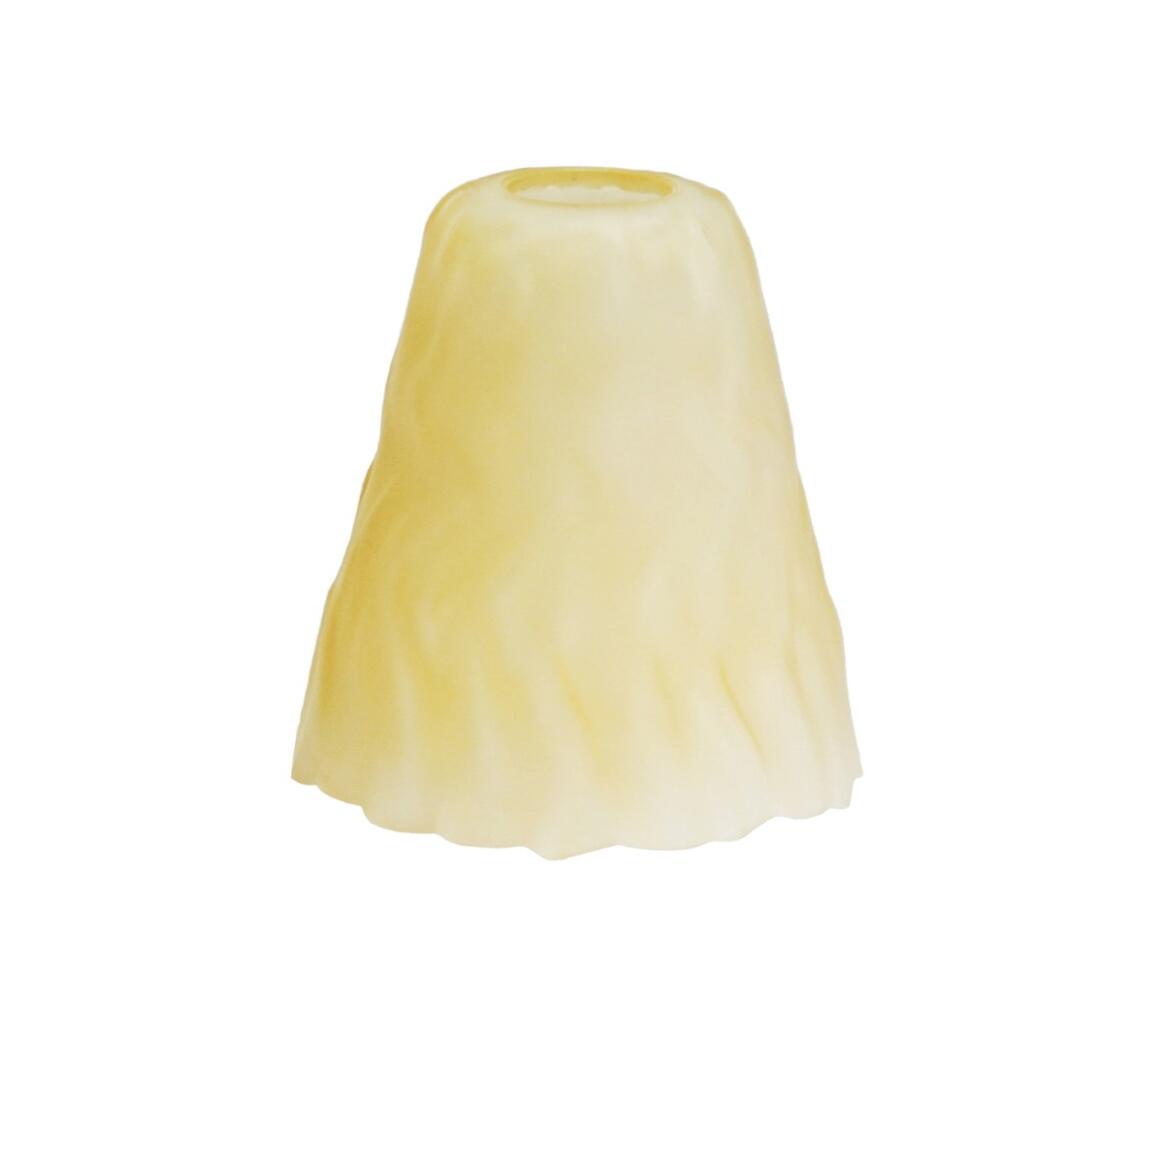 Cream patterned bell glass lamp shade main product image